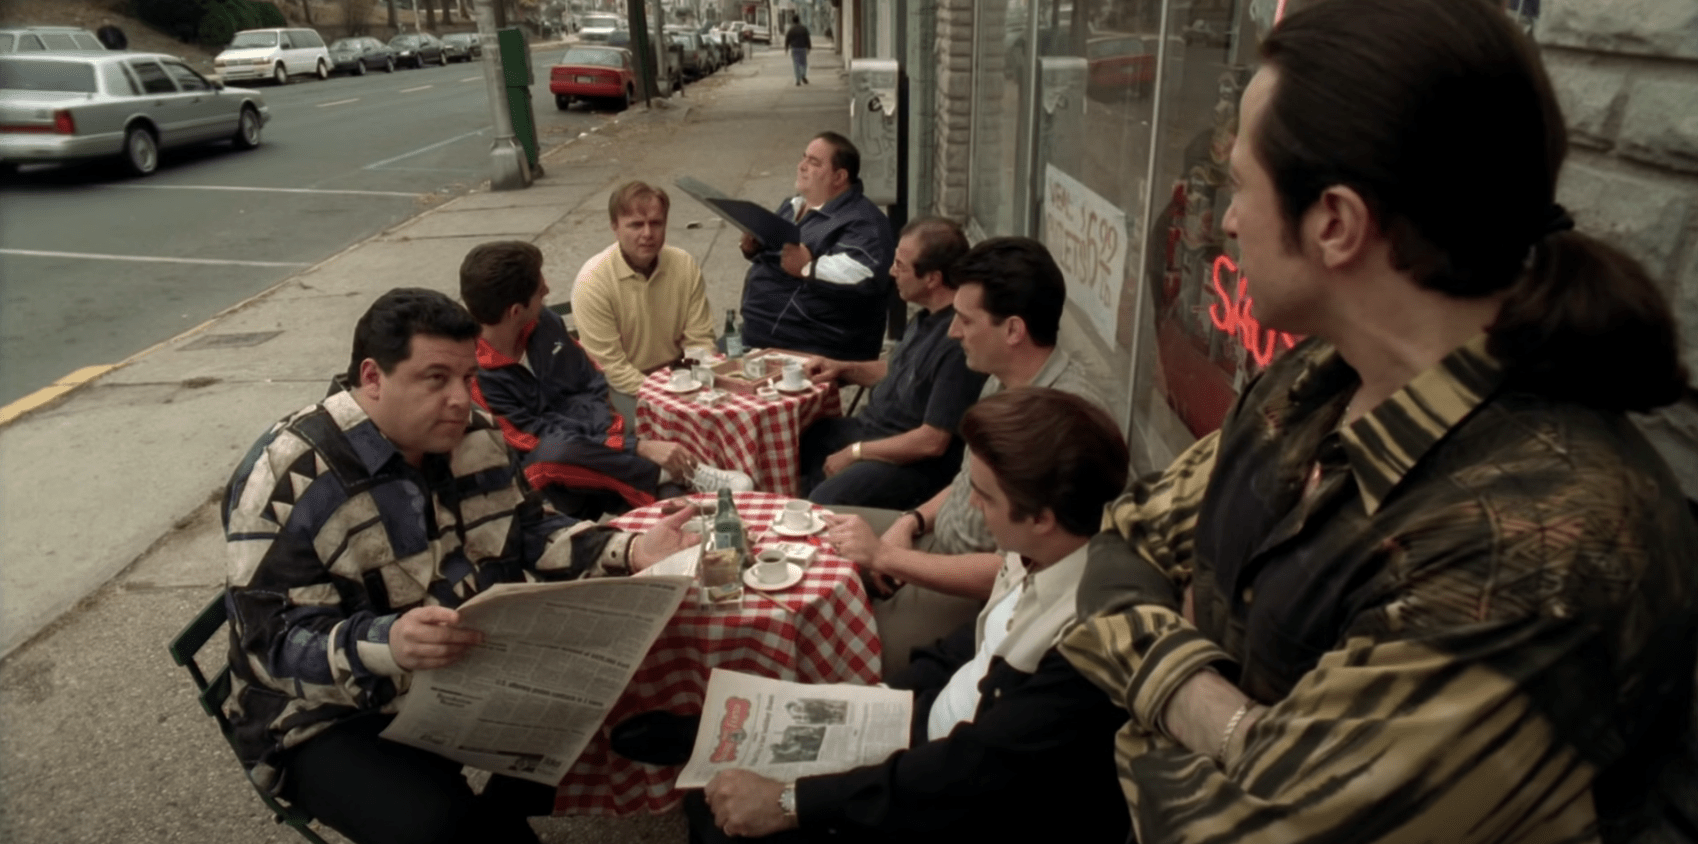 The Sopranos crew sitting outside the fictional Satriale's Pork Store in Paterson, New Jersey.